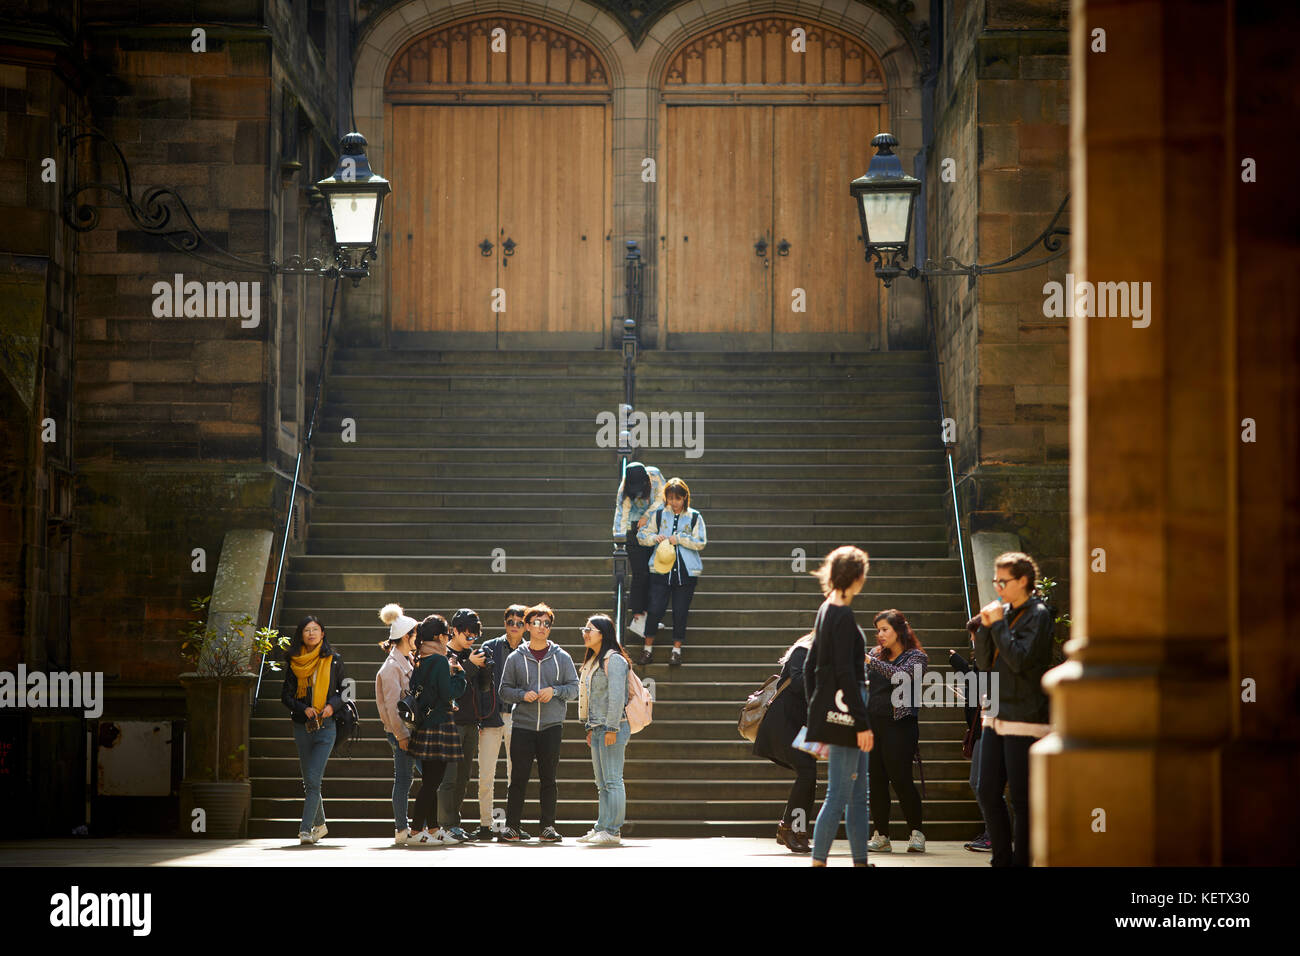 Scotland, New College in The University of Edinburgh Faculty of Divinity courtyard as tourists explore the stairs Stock Photo